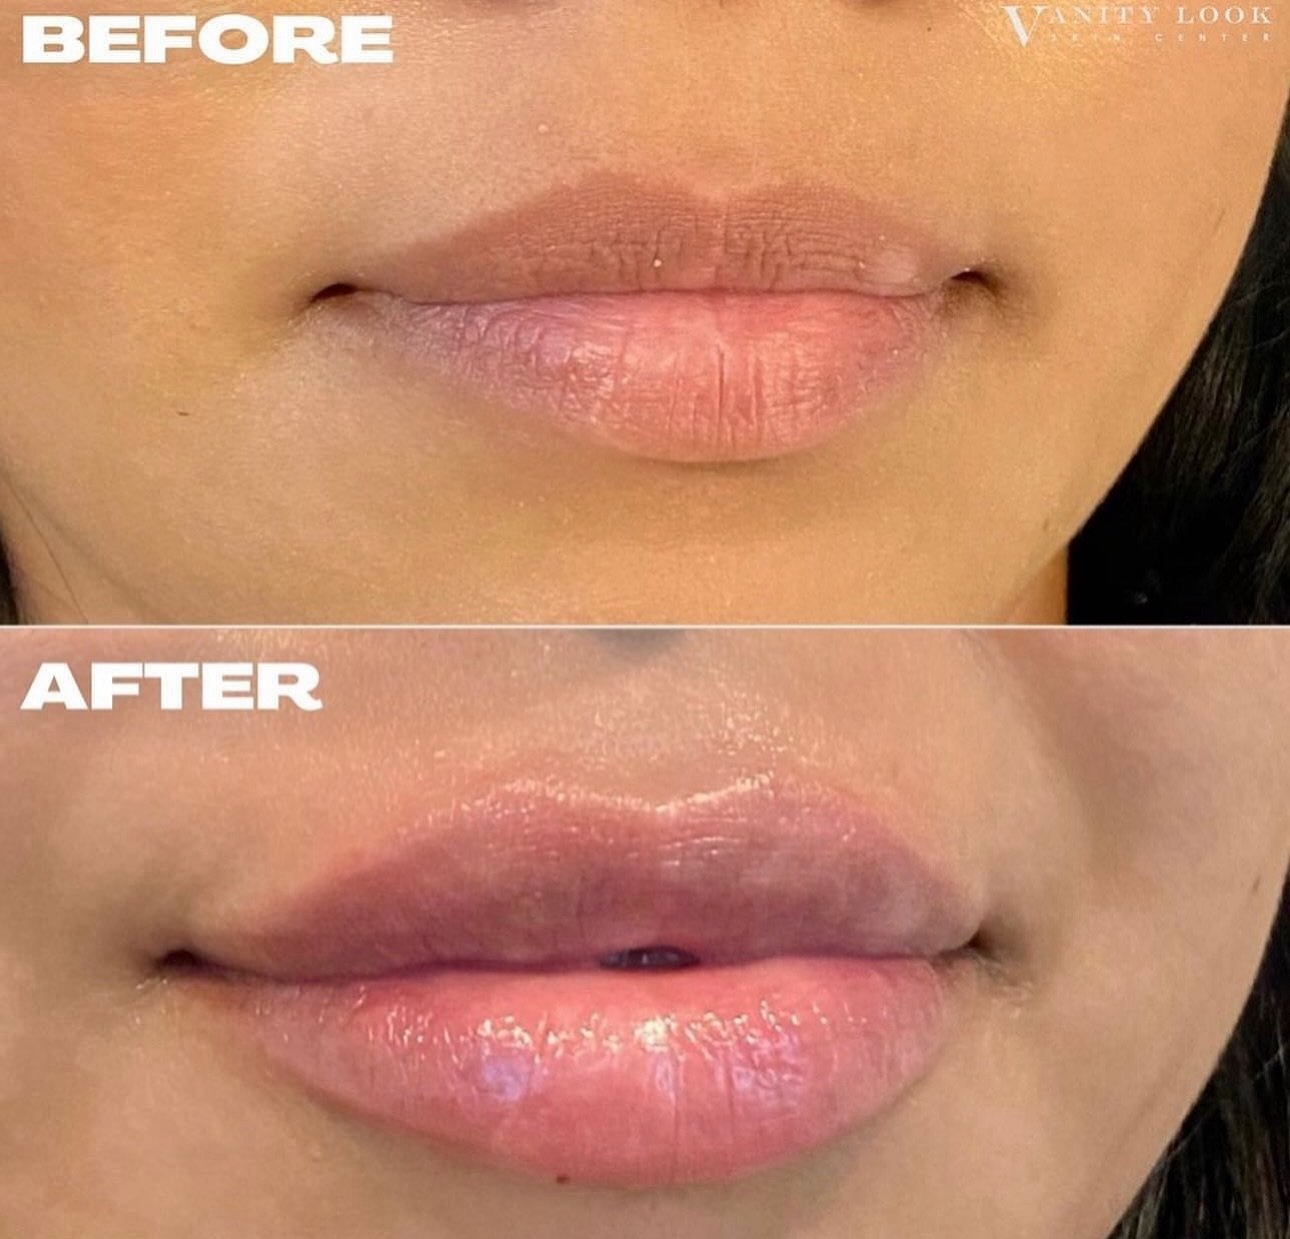 Fresh off the needle 👄 We plumped, defined, and balanced our clients lips, leaving her with a natural result.

Contact us to schedule
📞 818-290-3938
📍 13619 Moorpark St, Sherman Oaks, CA 91423
💻 Vanitylookskincenter.com

#lips #lipfiller #filler 